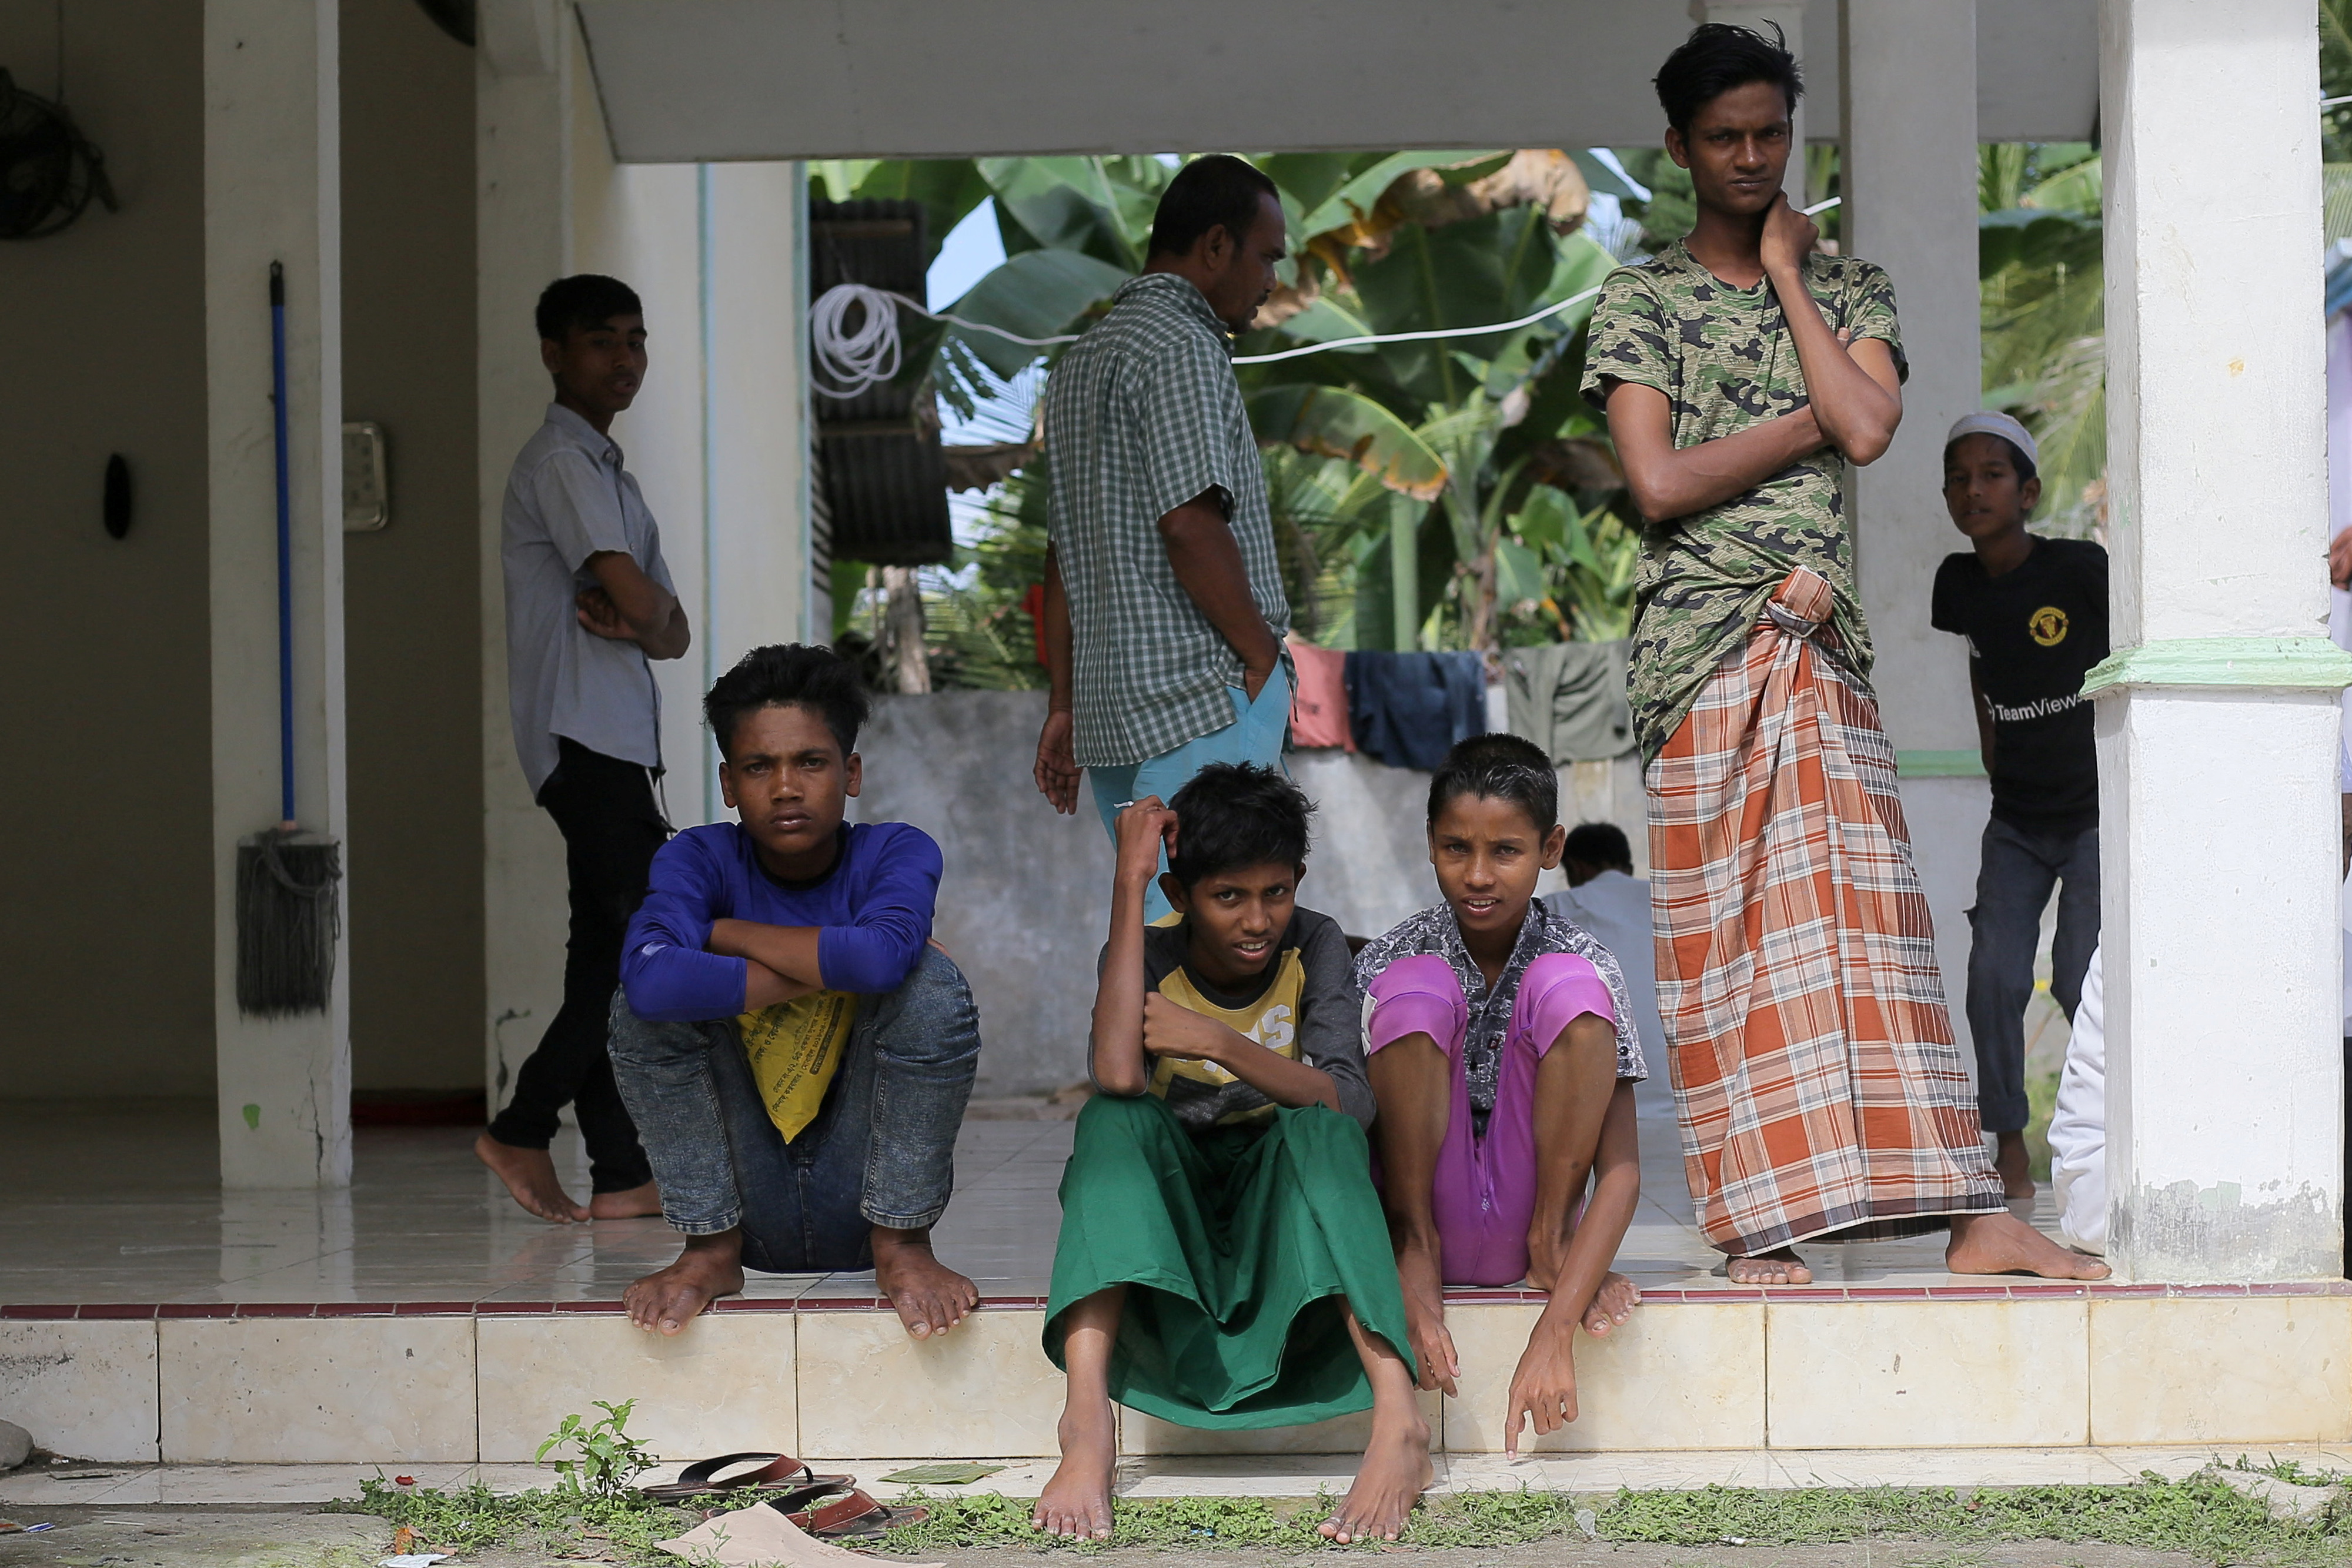 Rohingya refugees in a temporary shelter as 114 were brought to the shore of Indonesia